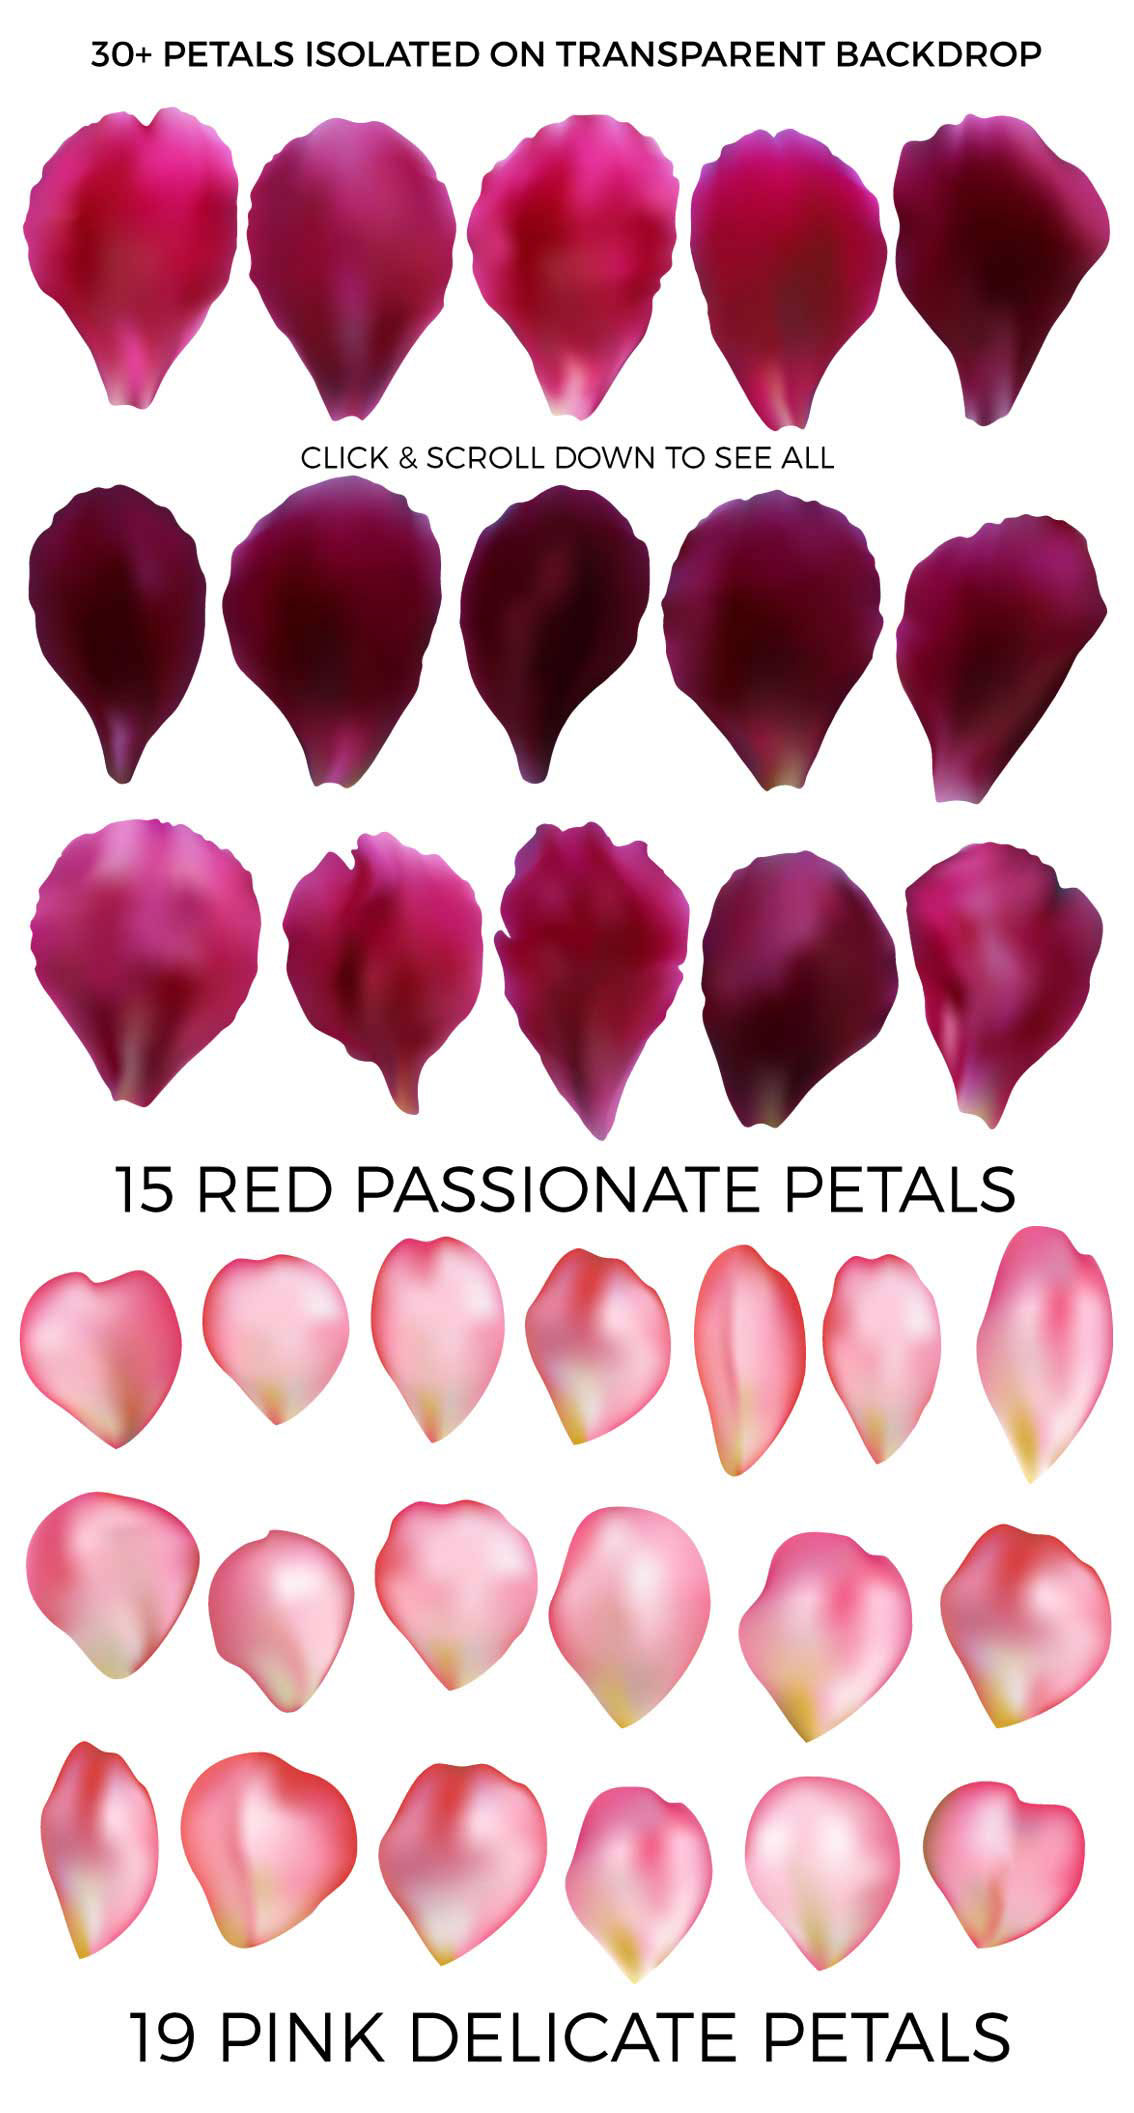 rose petals Falling petals background constructor red pink flying petals valentine day wedding cosmetic packaging